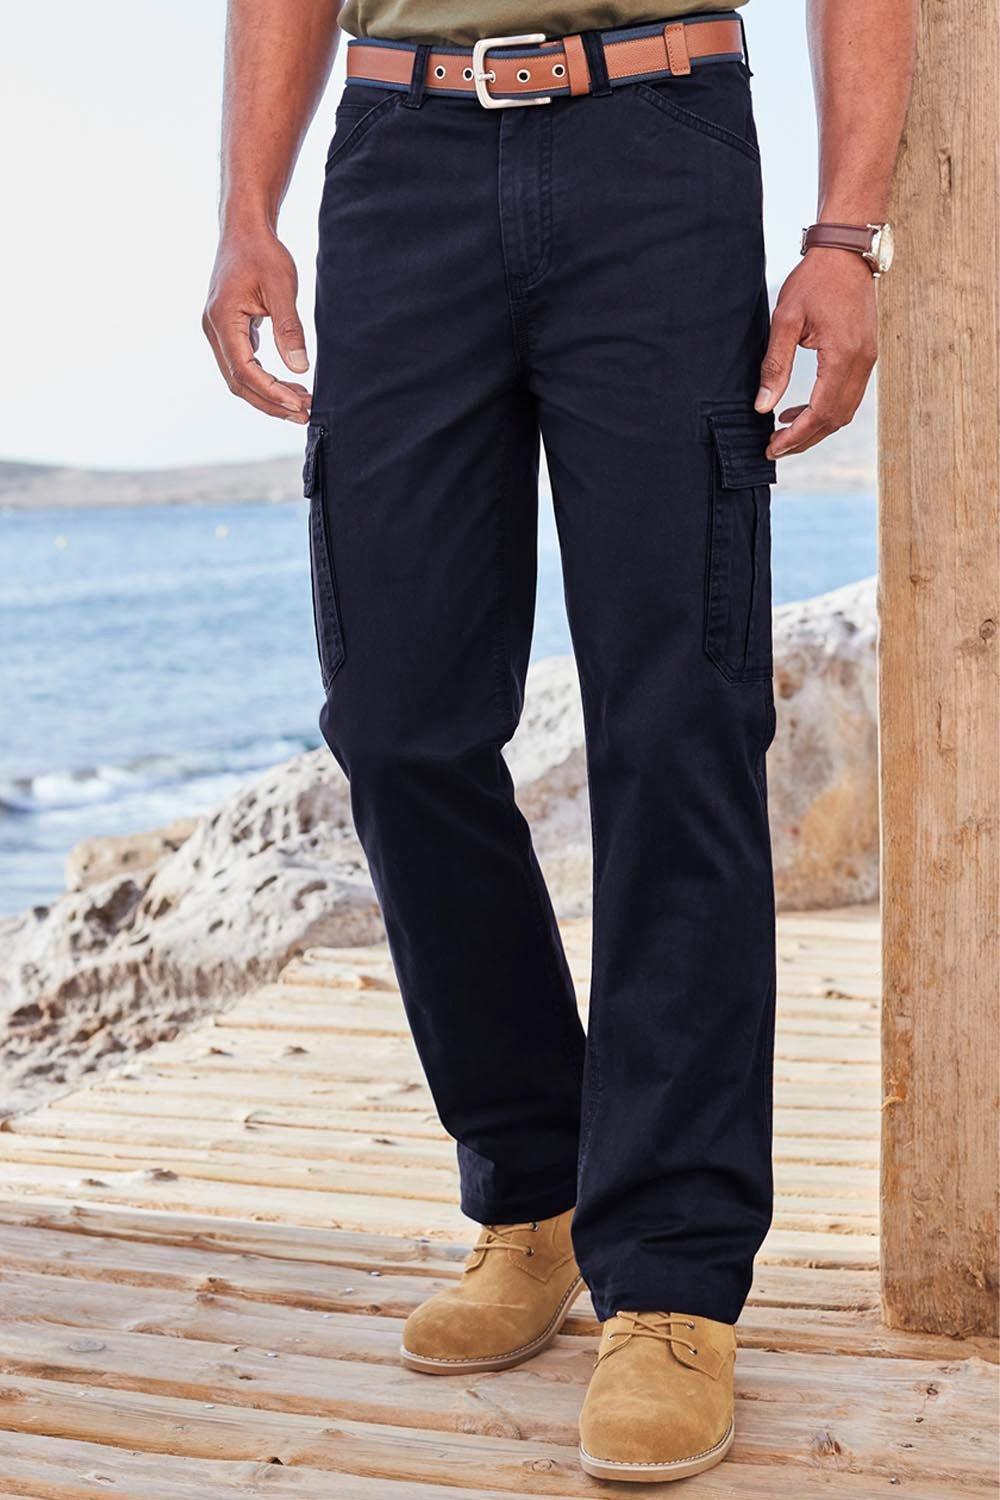 Cotton Pull-On Trousers at Cotton Traders